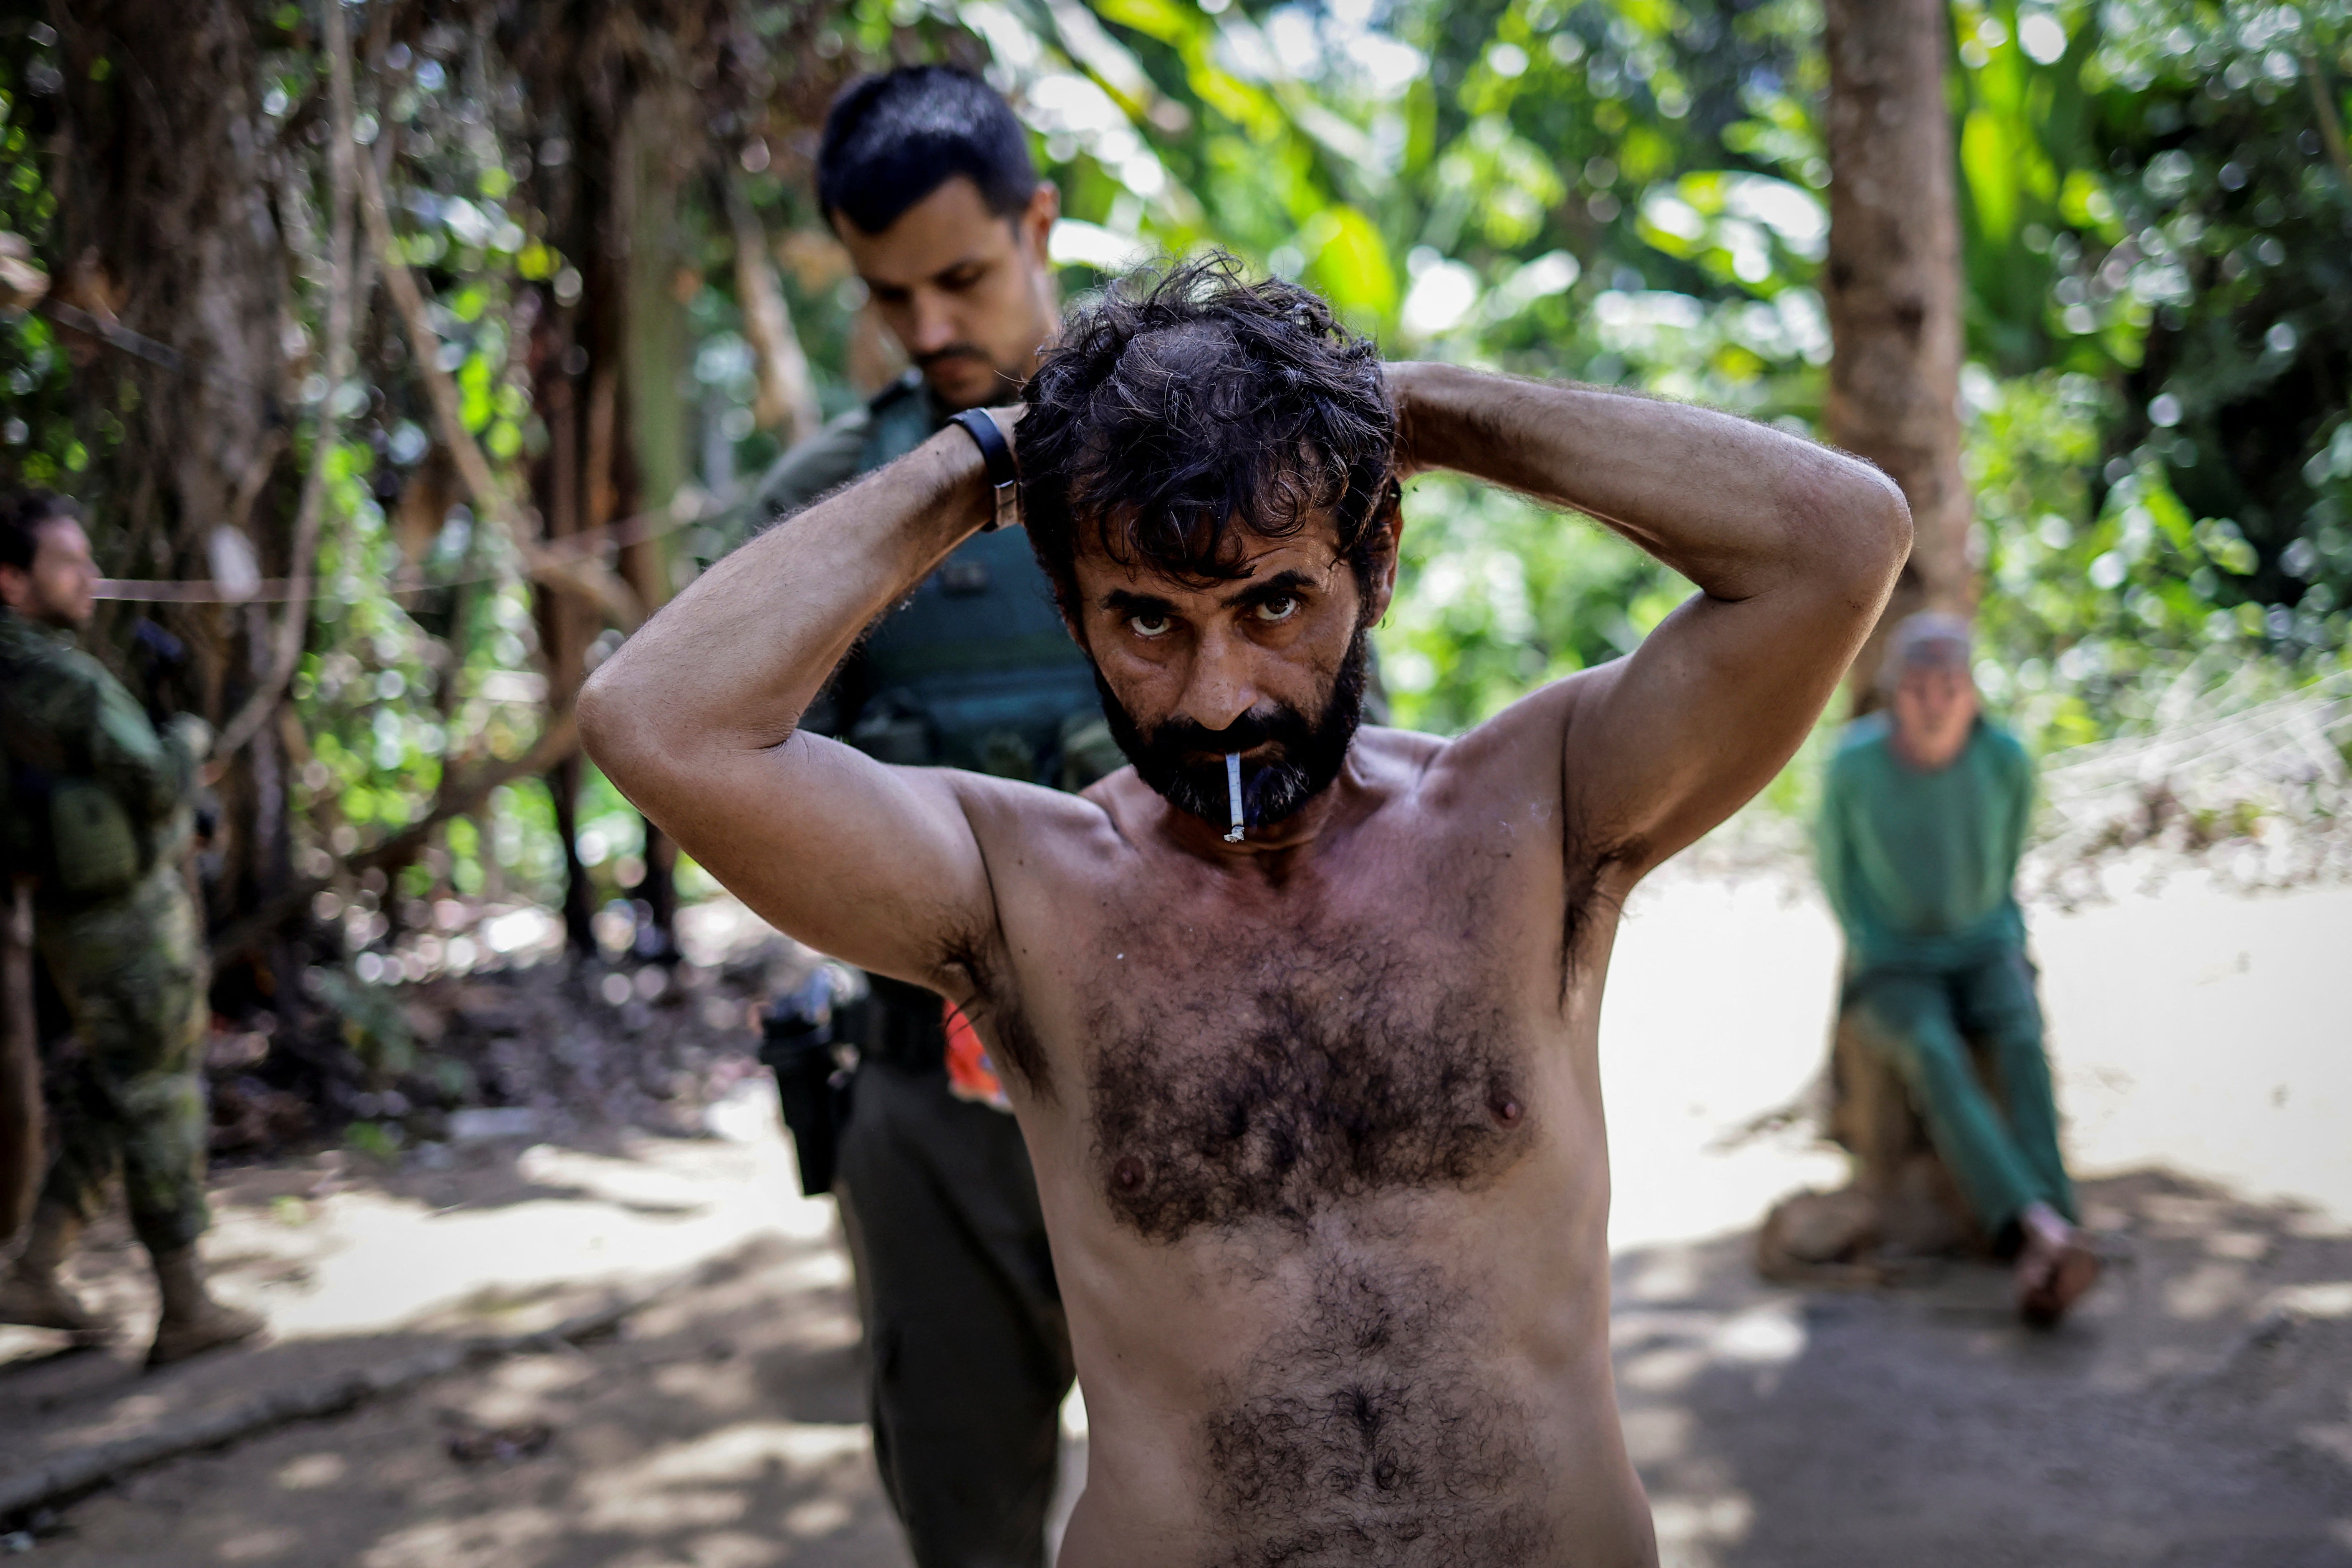 Brazilian government inspectors detain a suspect during an operation against illegal mining in Yanomami Indigenous land